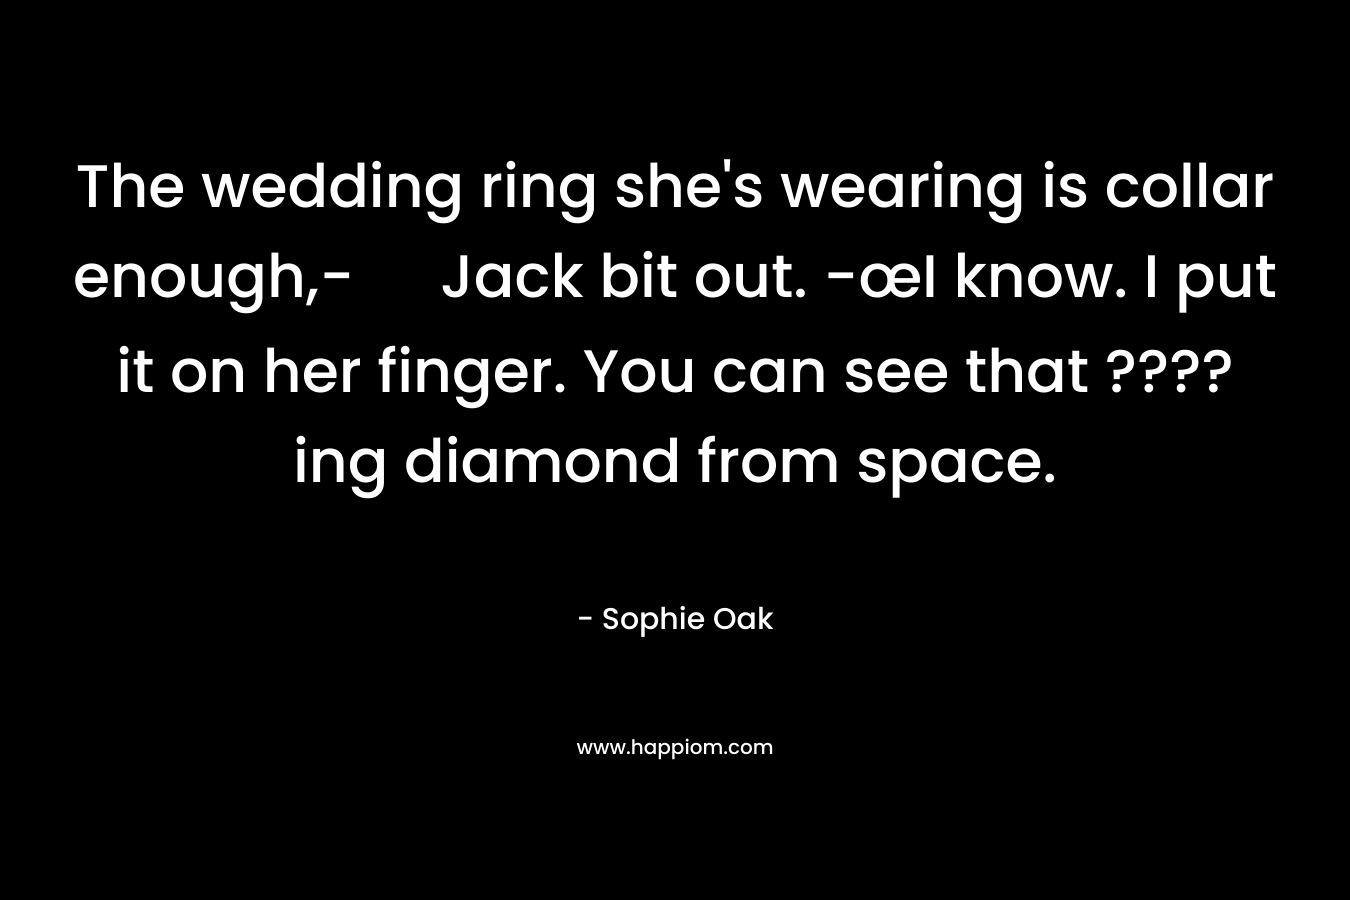 The wedding ring she's wearing is collar enough,- Jack bit out. -œI know. I put it on her finger. You can see that ????ing diamond from space.